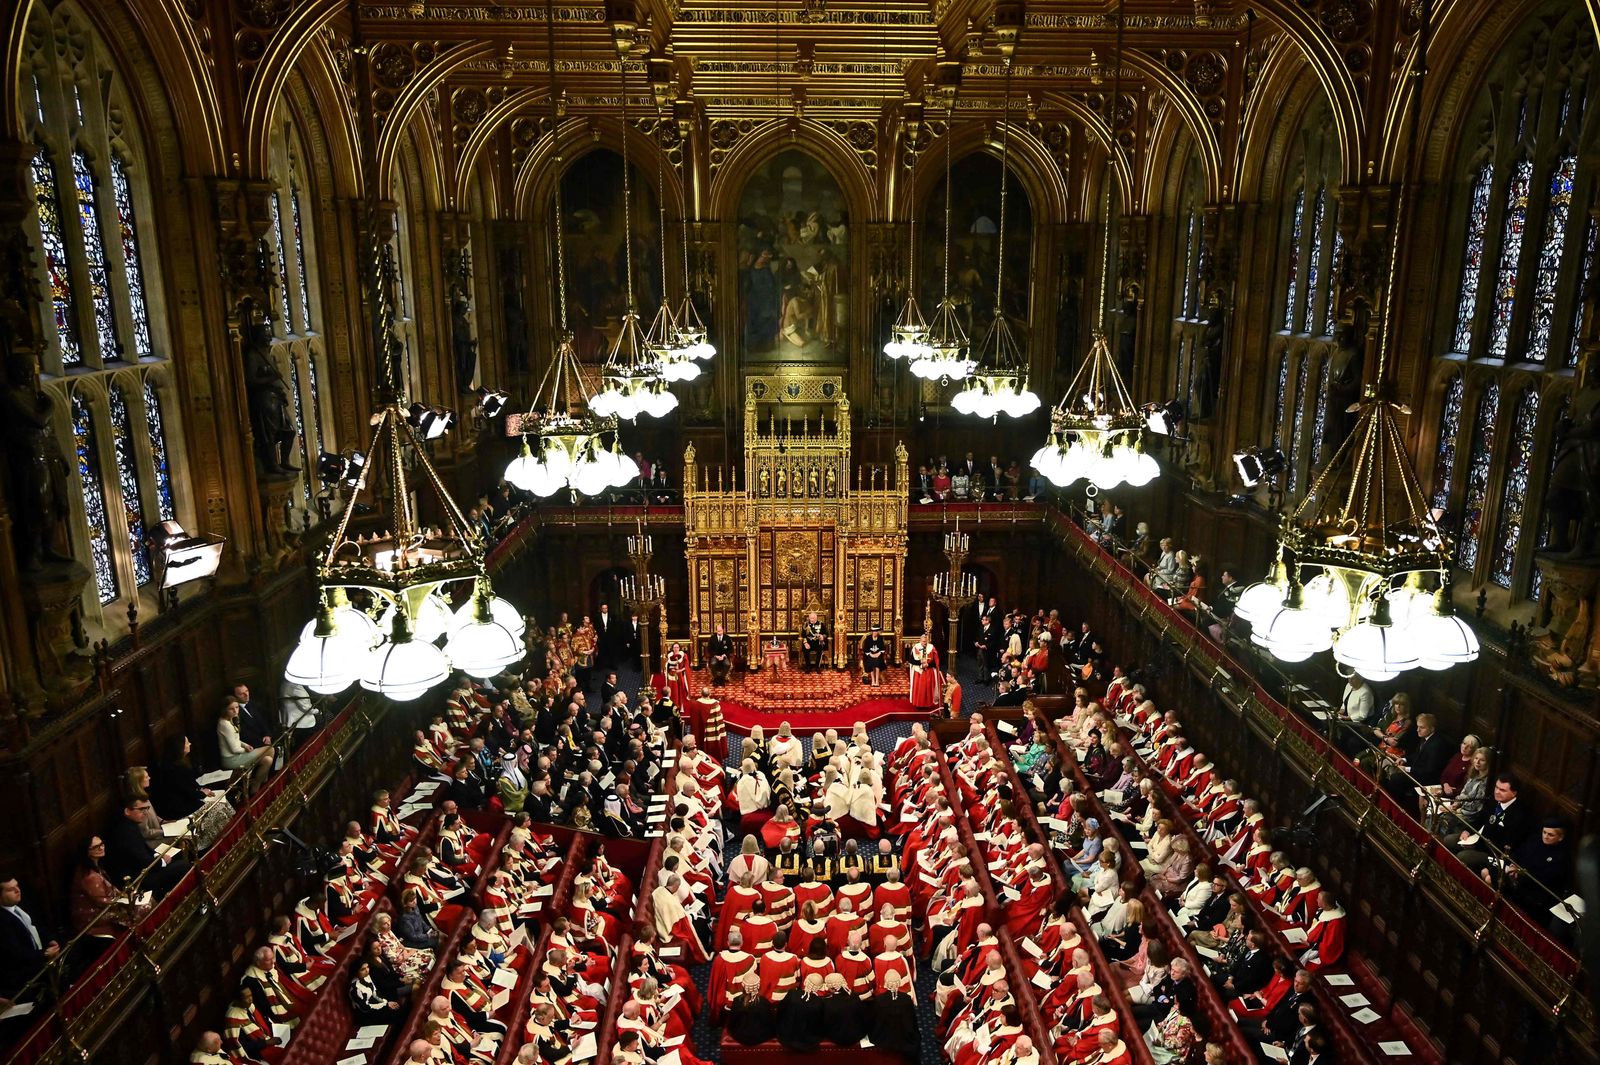 Britain's Prince Charles, Prince of Wales  (2nd R) reads the Queen's Speech as he sits by the Imperial State Crown (2nd L), Britain's Camilla, Duchess of Cornwall (R) and Britain's Prince William, Duke of Cambridge (L) in the House of Lords chamber, during the State Opening of Parliament, at the Houses of Parliament, in London, on May 10, 2022. - The 96-year-old monarch, who usually presides over the pomp-filled event and reads out her government's legislative programme from a gilded throne in the House of Lords, will skip the annual showpiece on her doctors' advice. (Photo by Ben STANSALL / various sources / AFP) - AFP